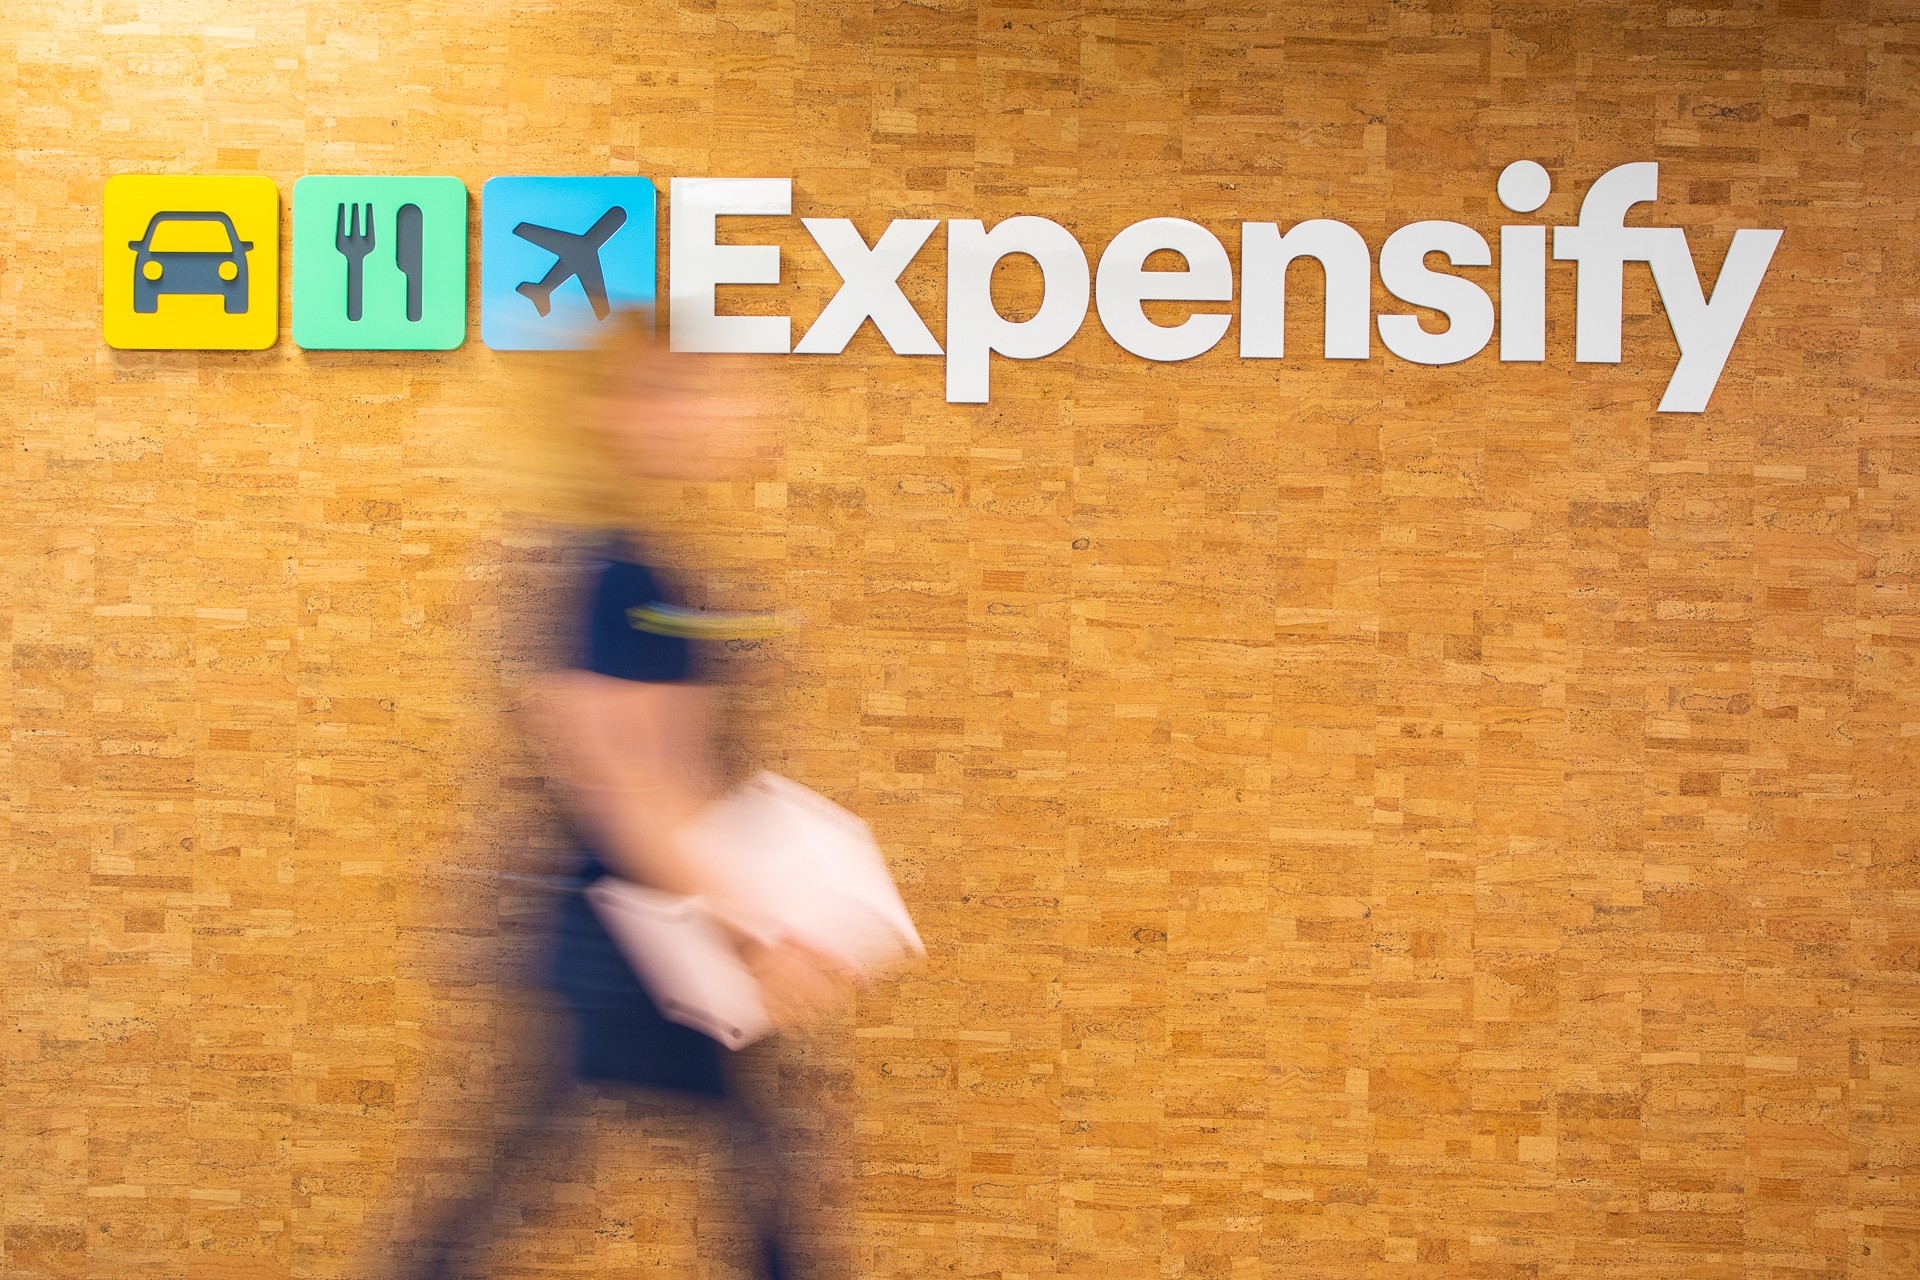 Expensify's San Francisco headquarters